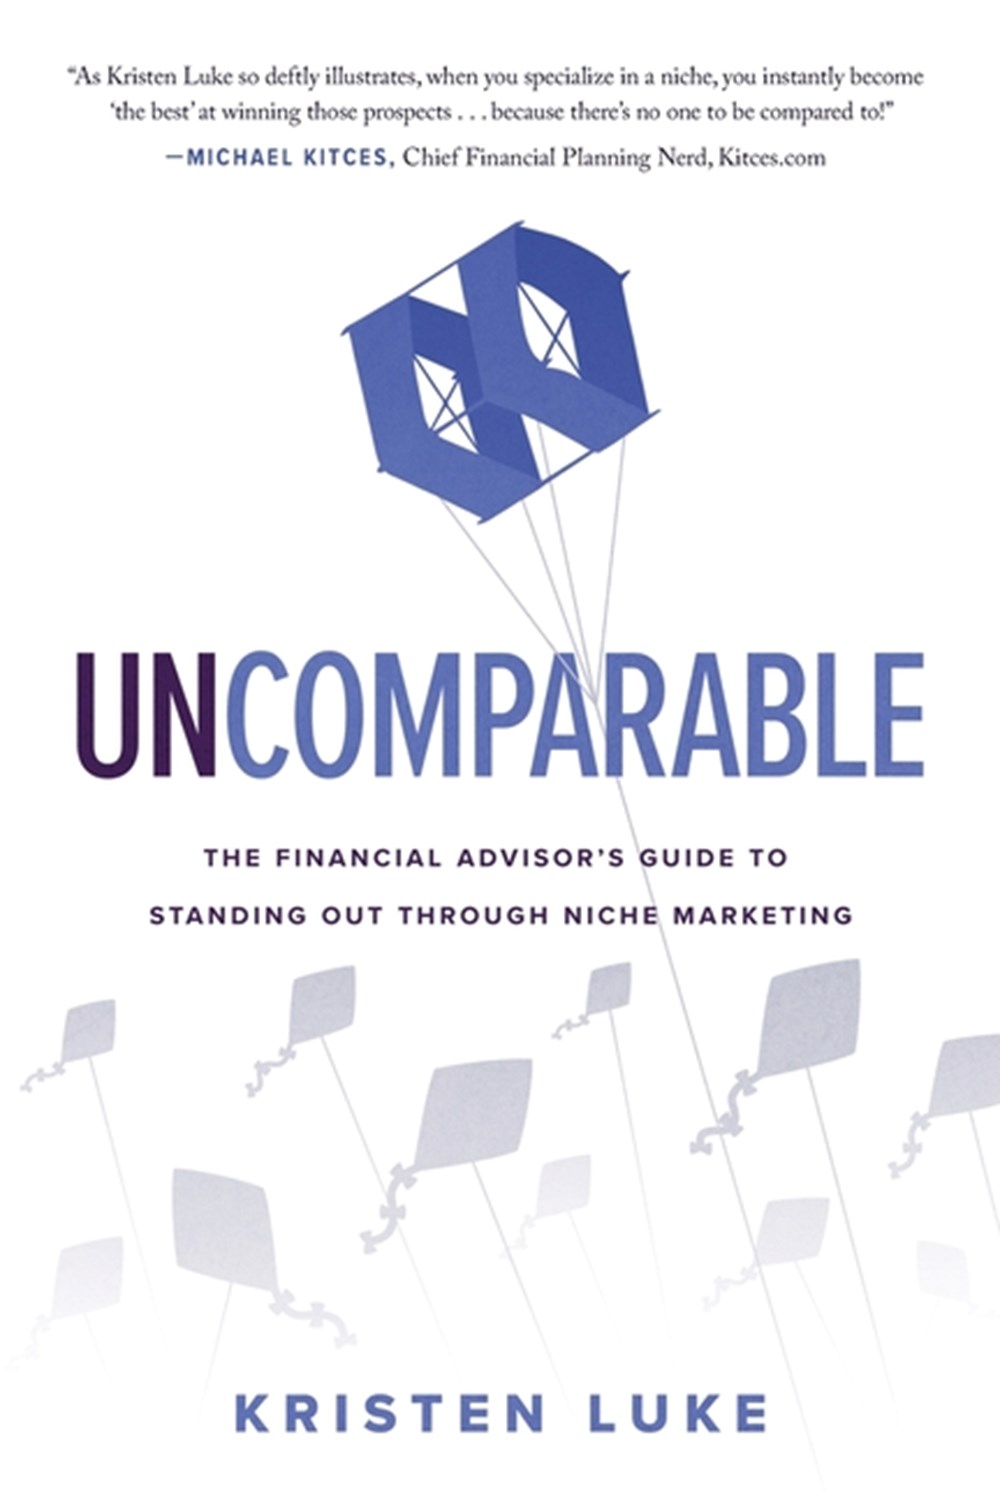 Uncomparable: The Financial Advisor's Guide to Standing Out through Niche Marketing